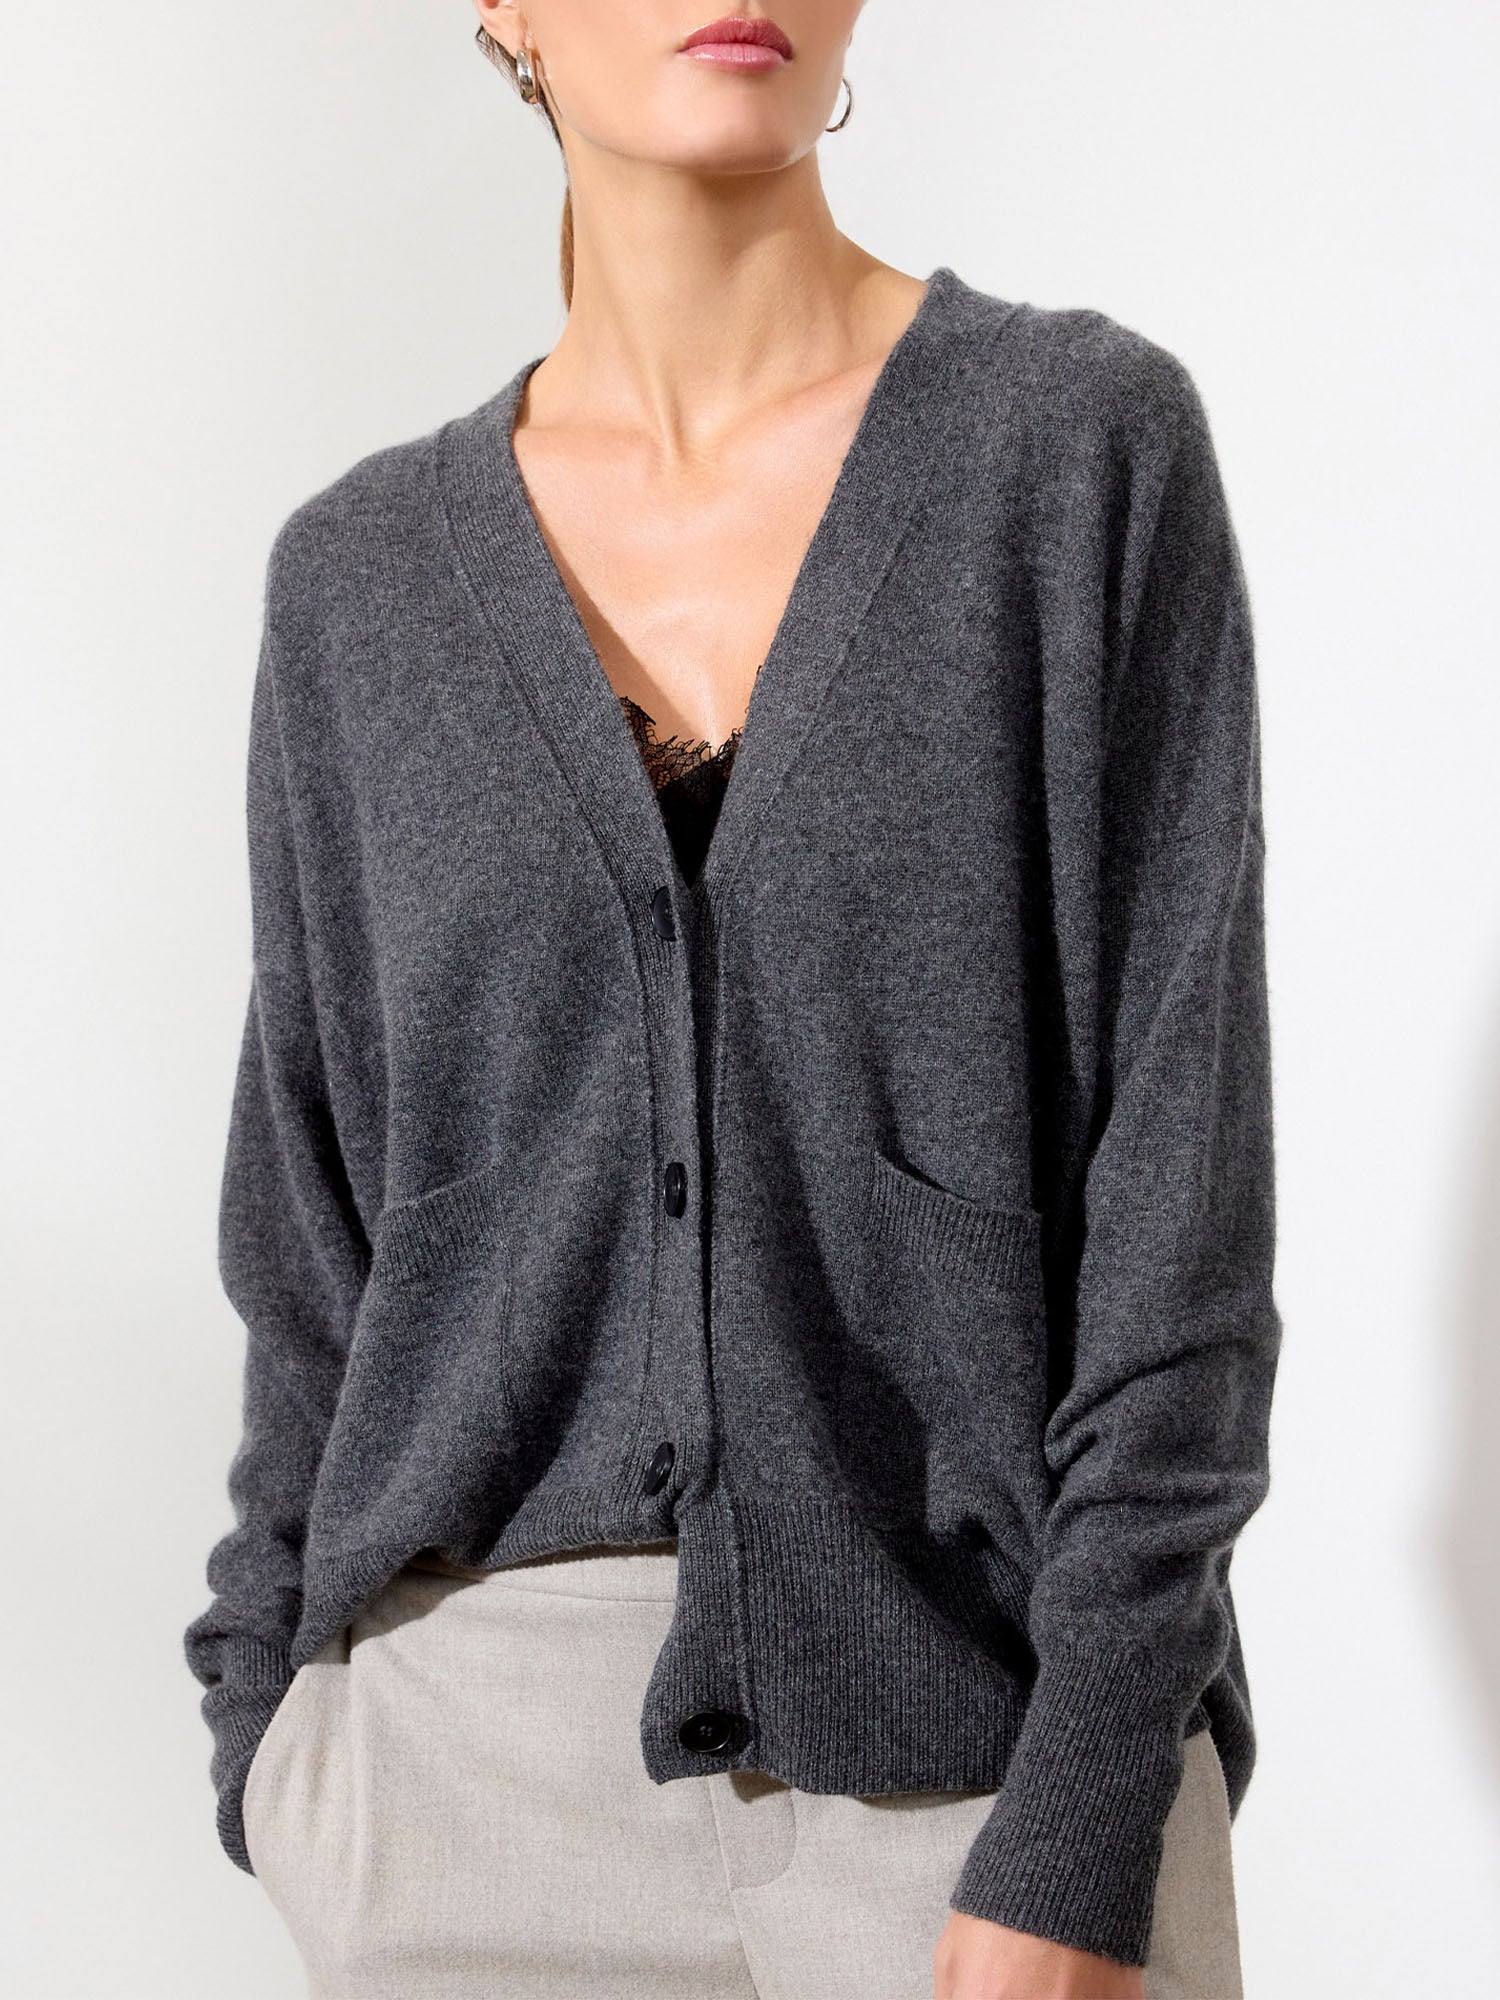 Lace dark grey layered cardigan sweater front view